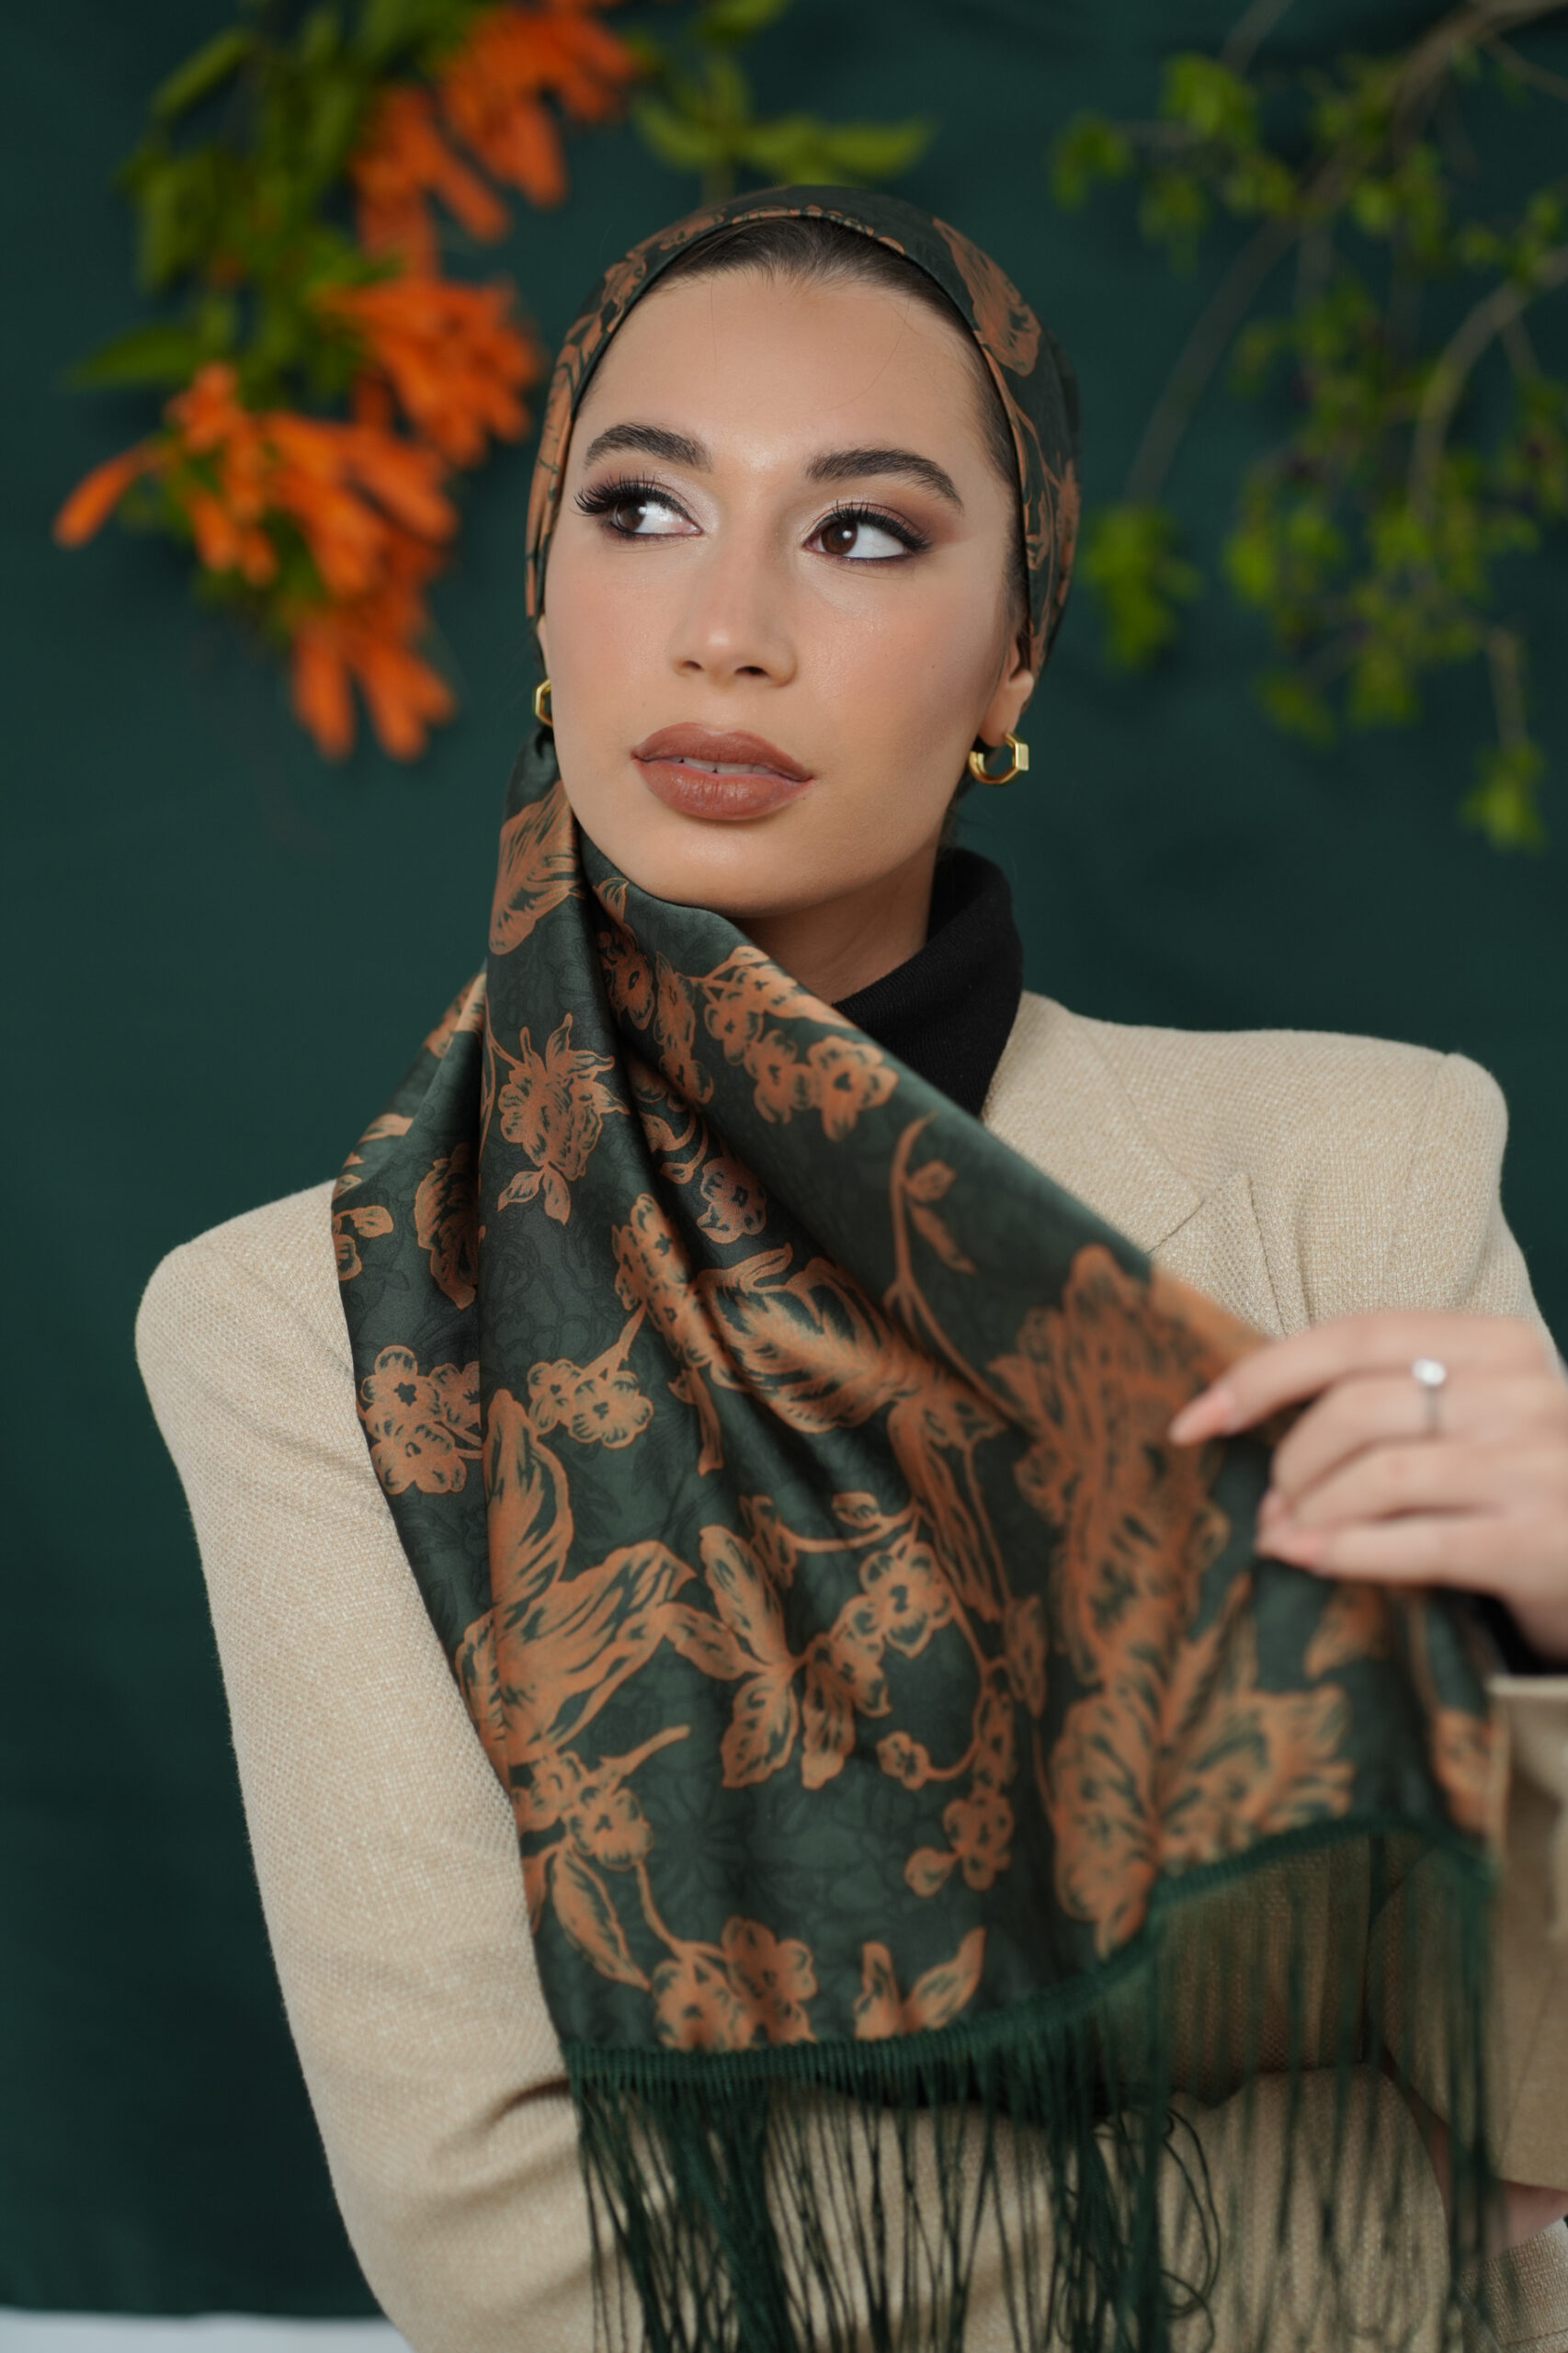 Printed Dark Green and Brown Flowers Headscarf With Fringes